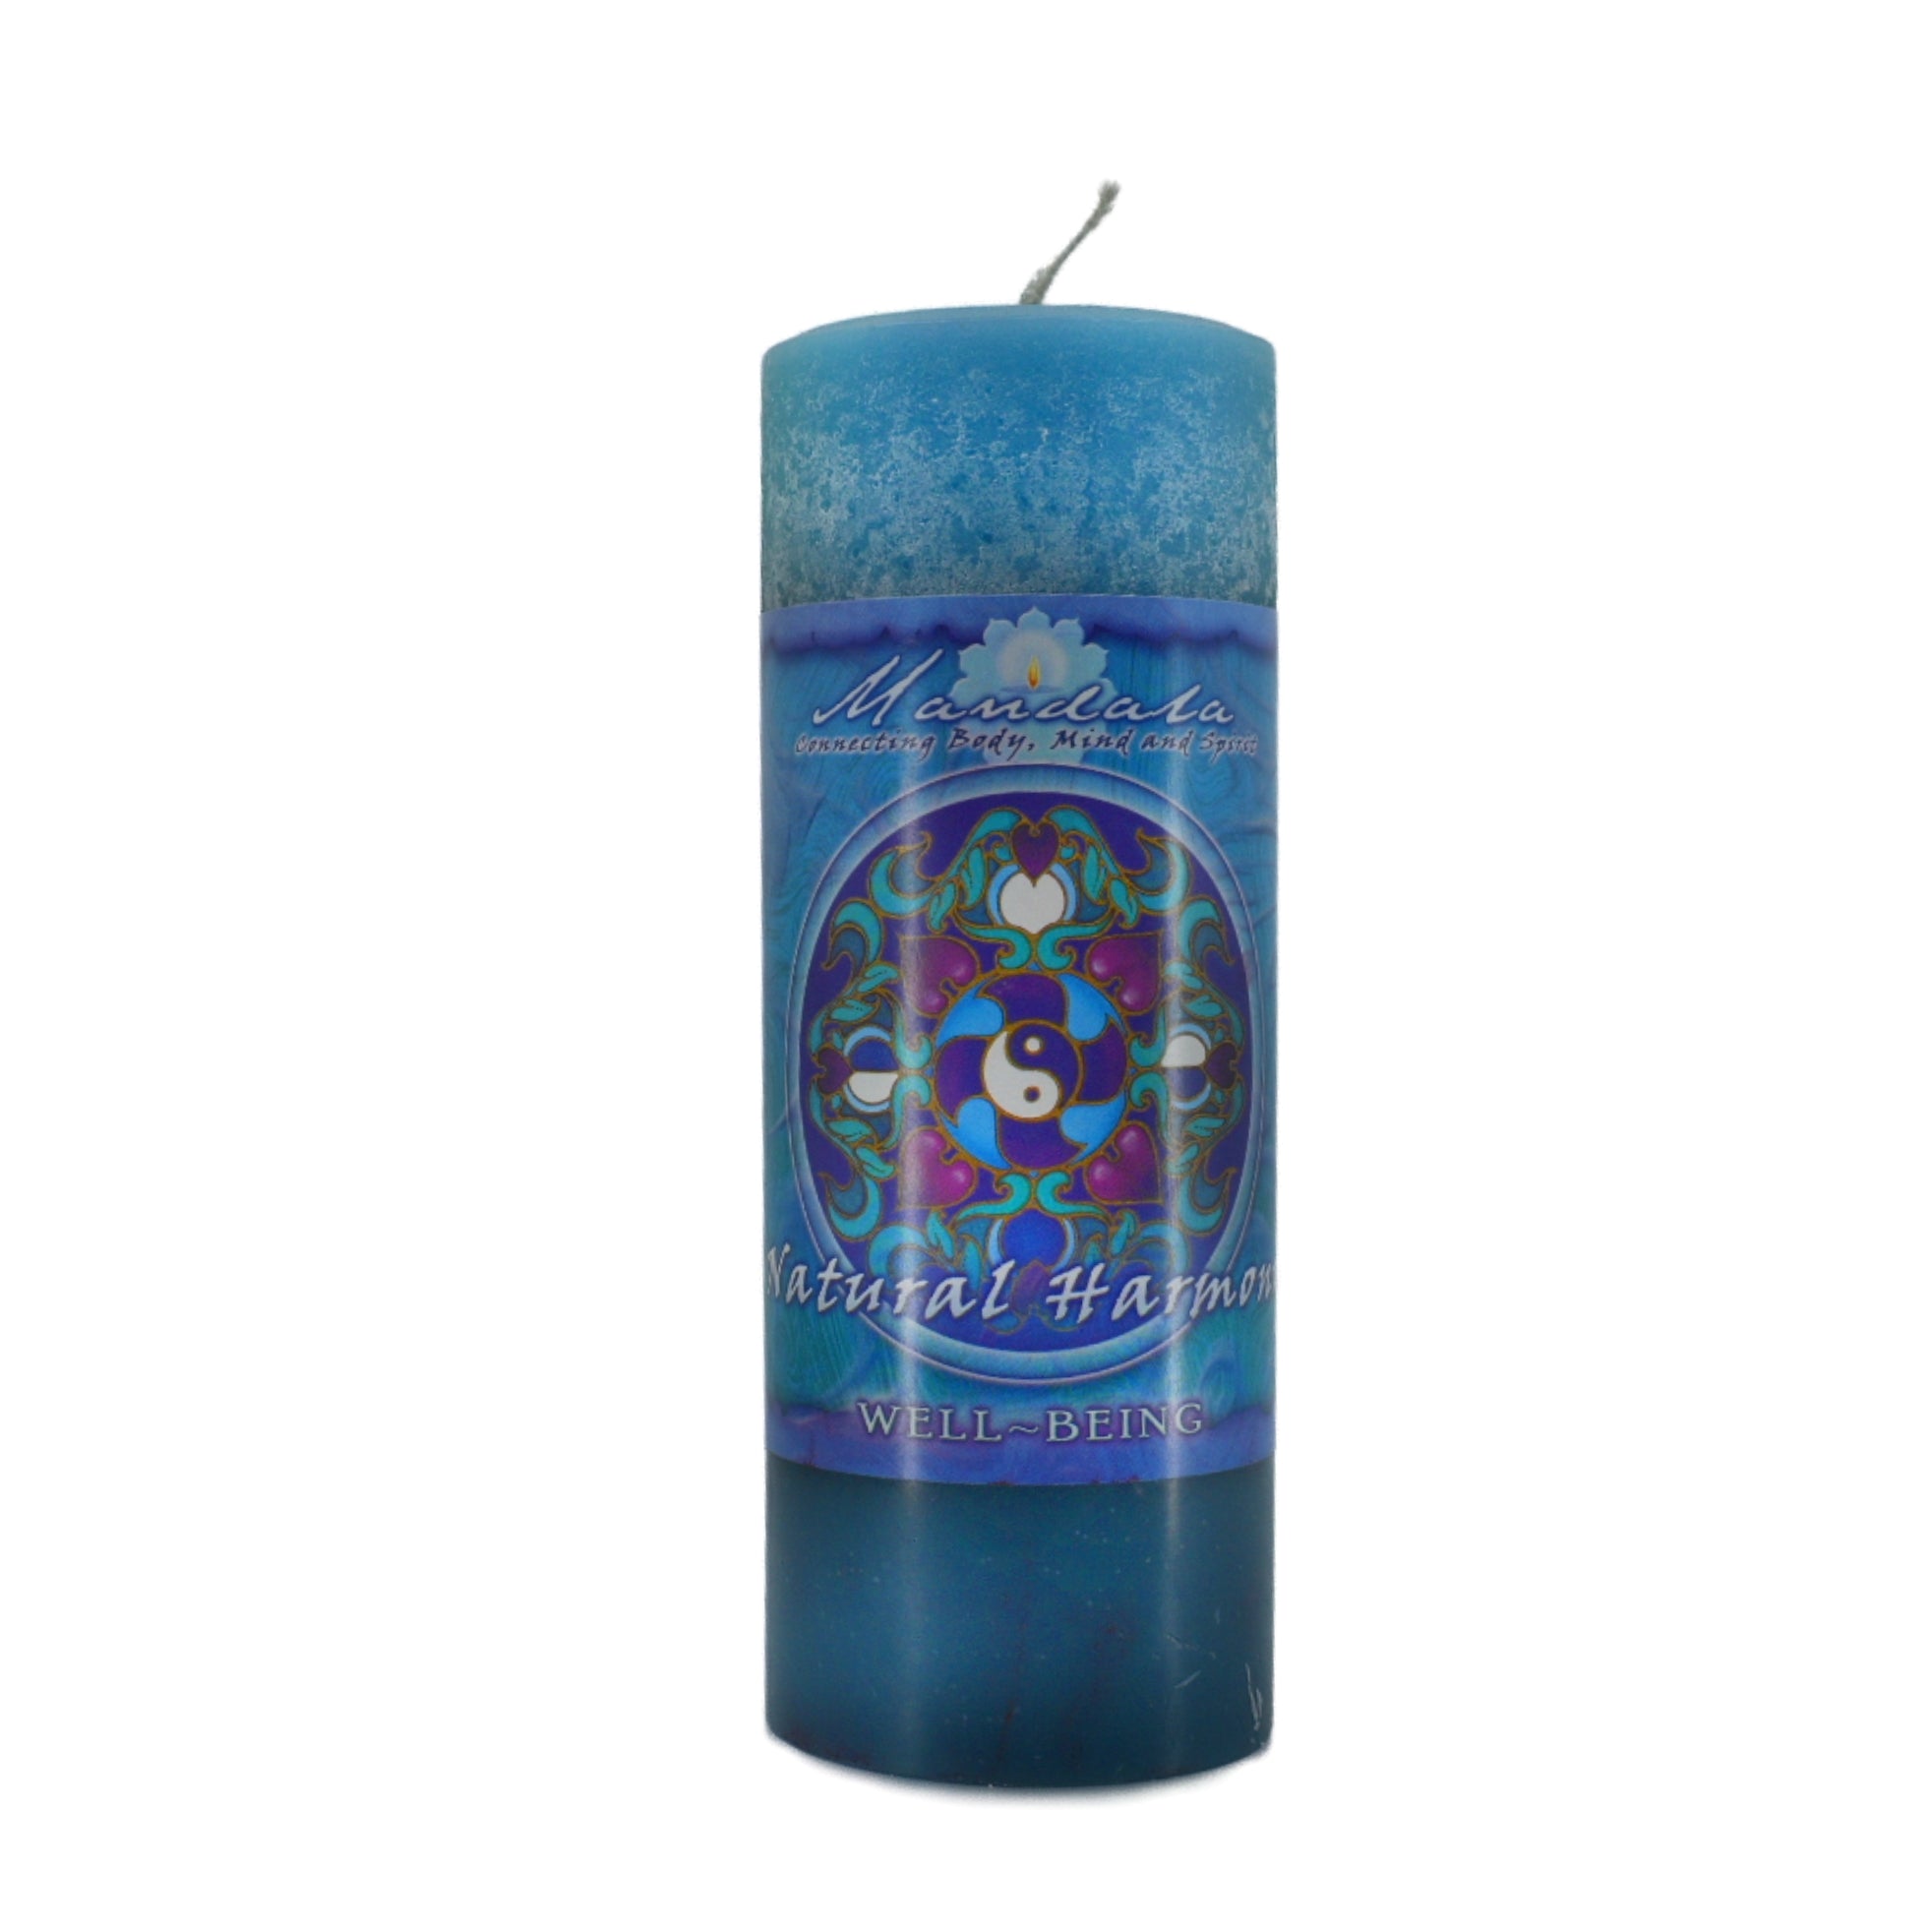 Well Being Mandala Candle.  This light blue to darker blue candle is scented with sun goddess rose, mandarin and jasmine essential oils.  When lit enhances natural harmony.  Well Being - natural harmony, for attaining a blissful mental state.  This spell candle brings peace and contentment to your life.  It is for health and well being, balance and harmony, and natural rhythm.  It will free you from the bad memories that burden your heart.